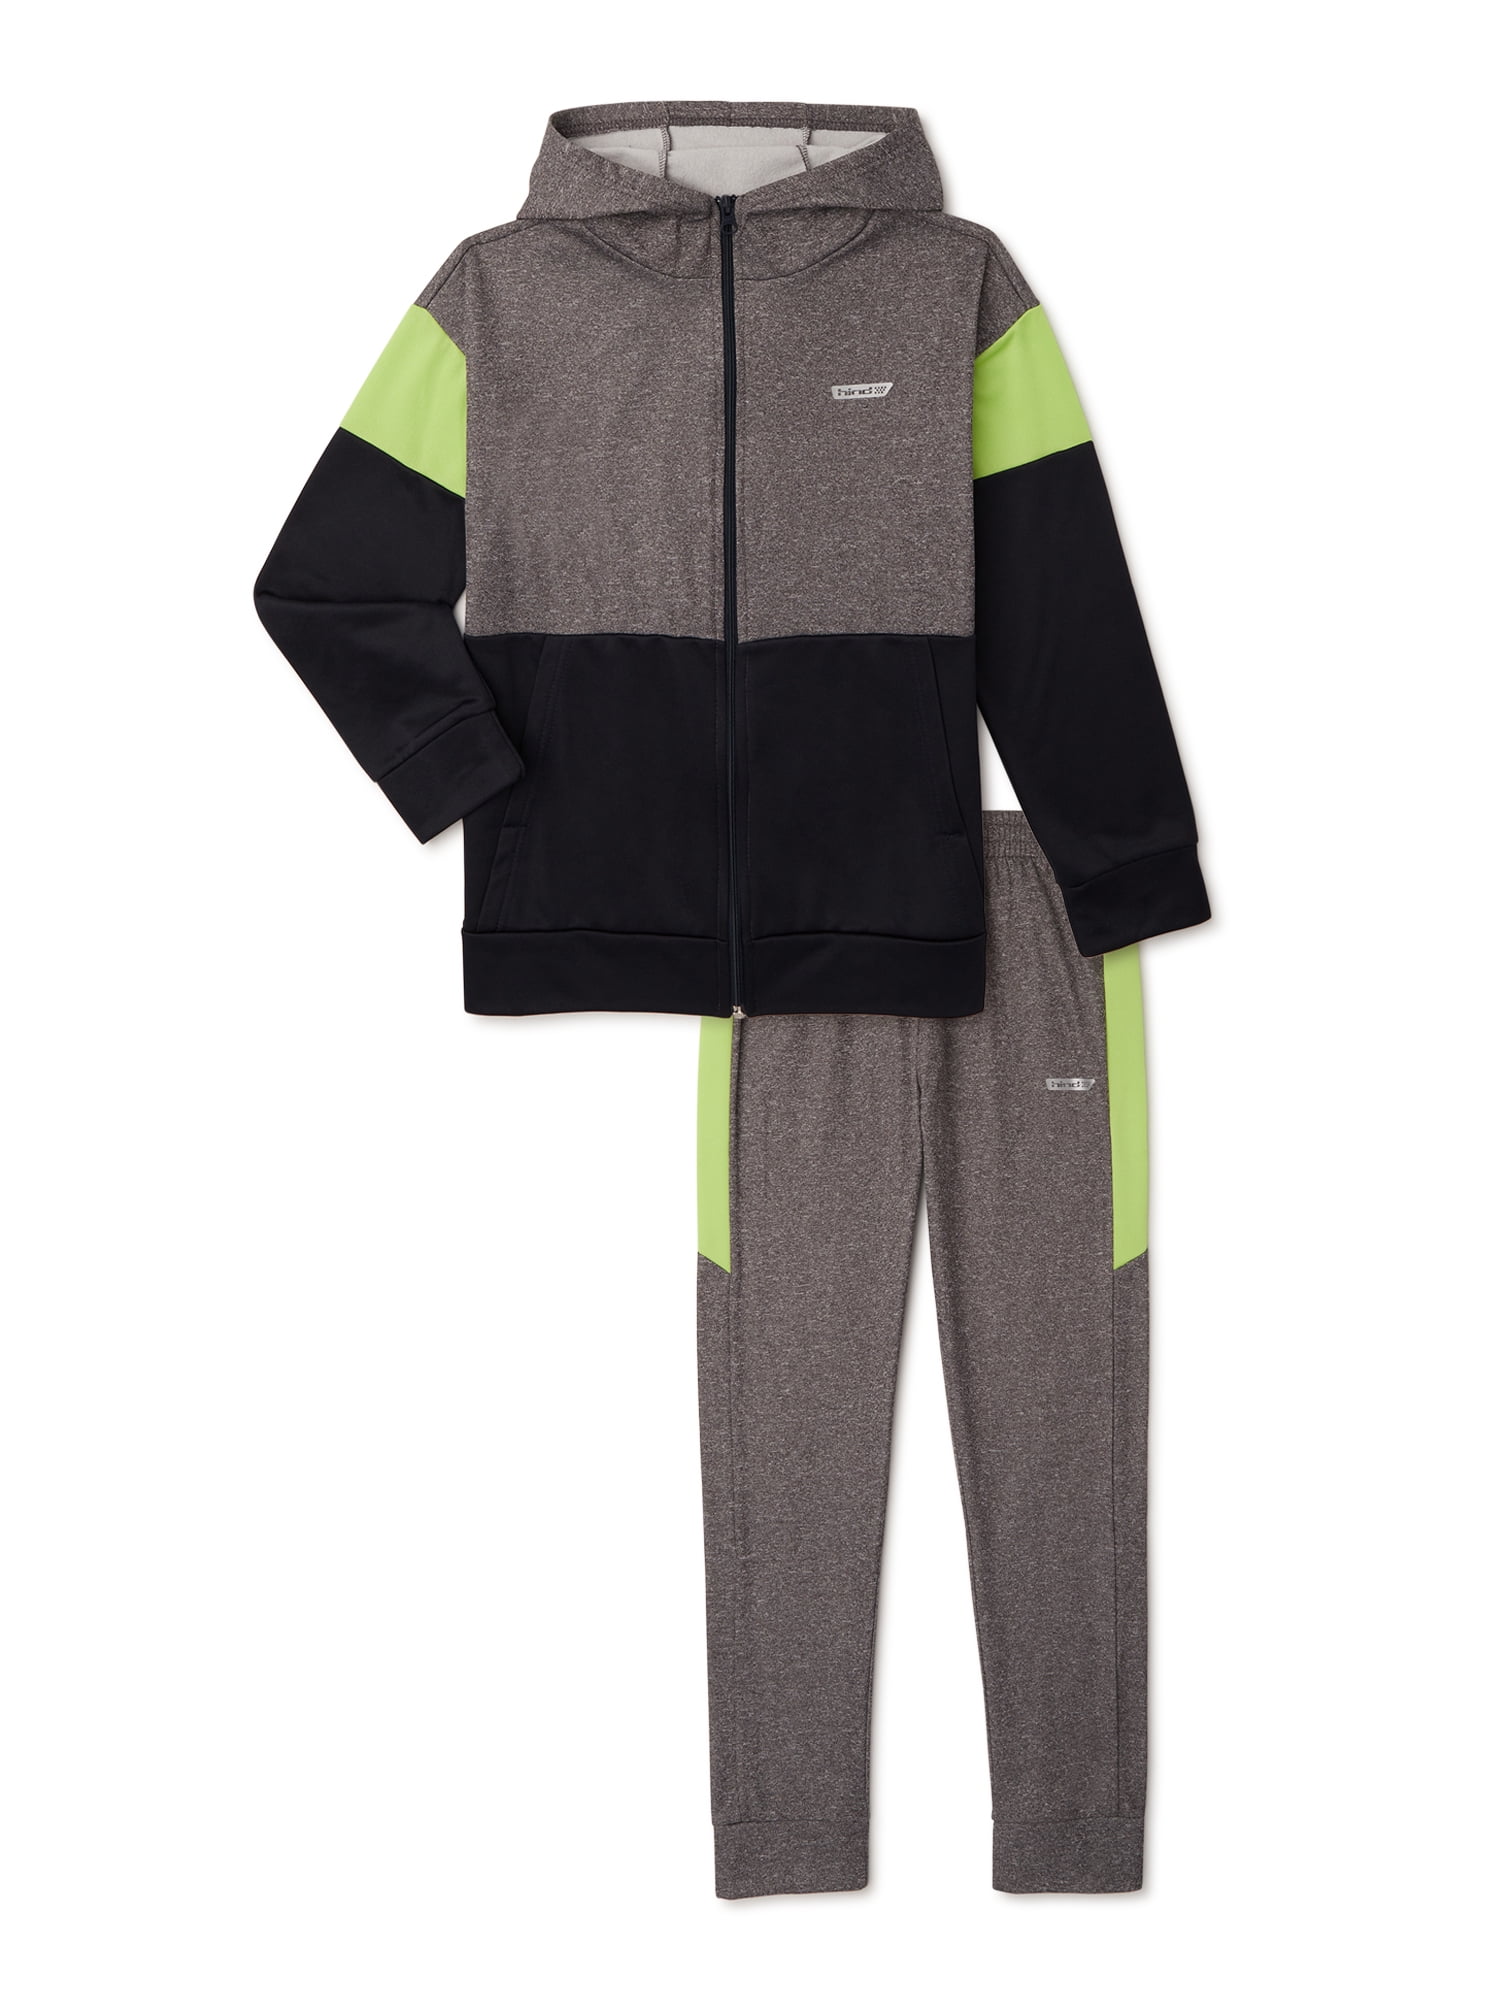 Boys Polyester Tracksuit Camouflage Hoodie Jacket and Bottom Jogging Suit 4-12 Years